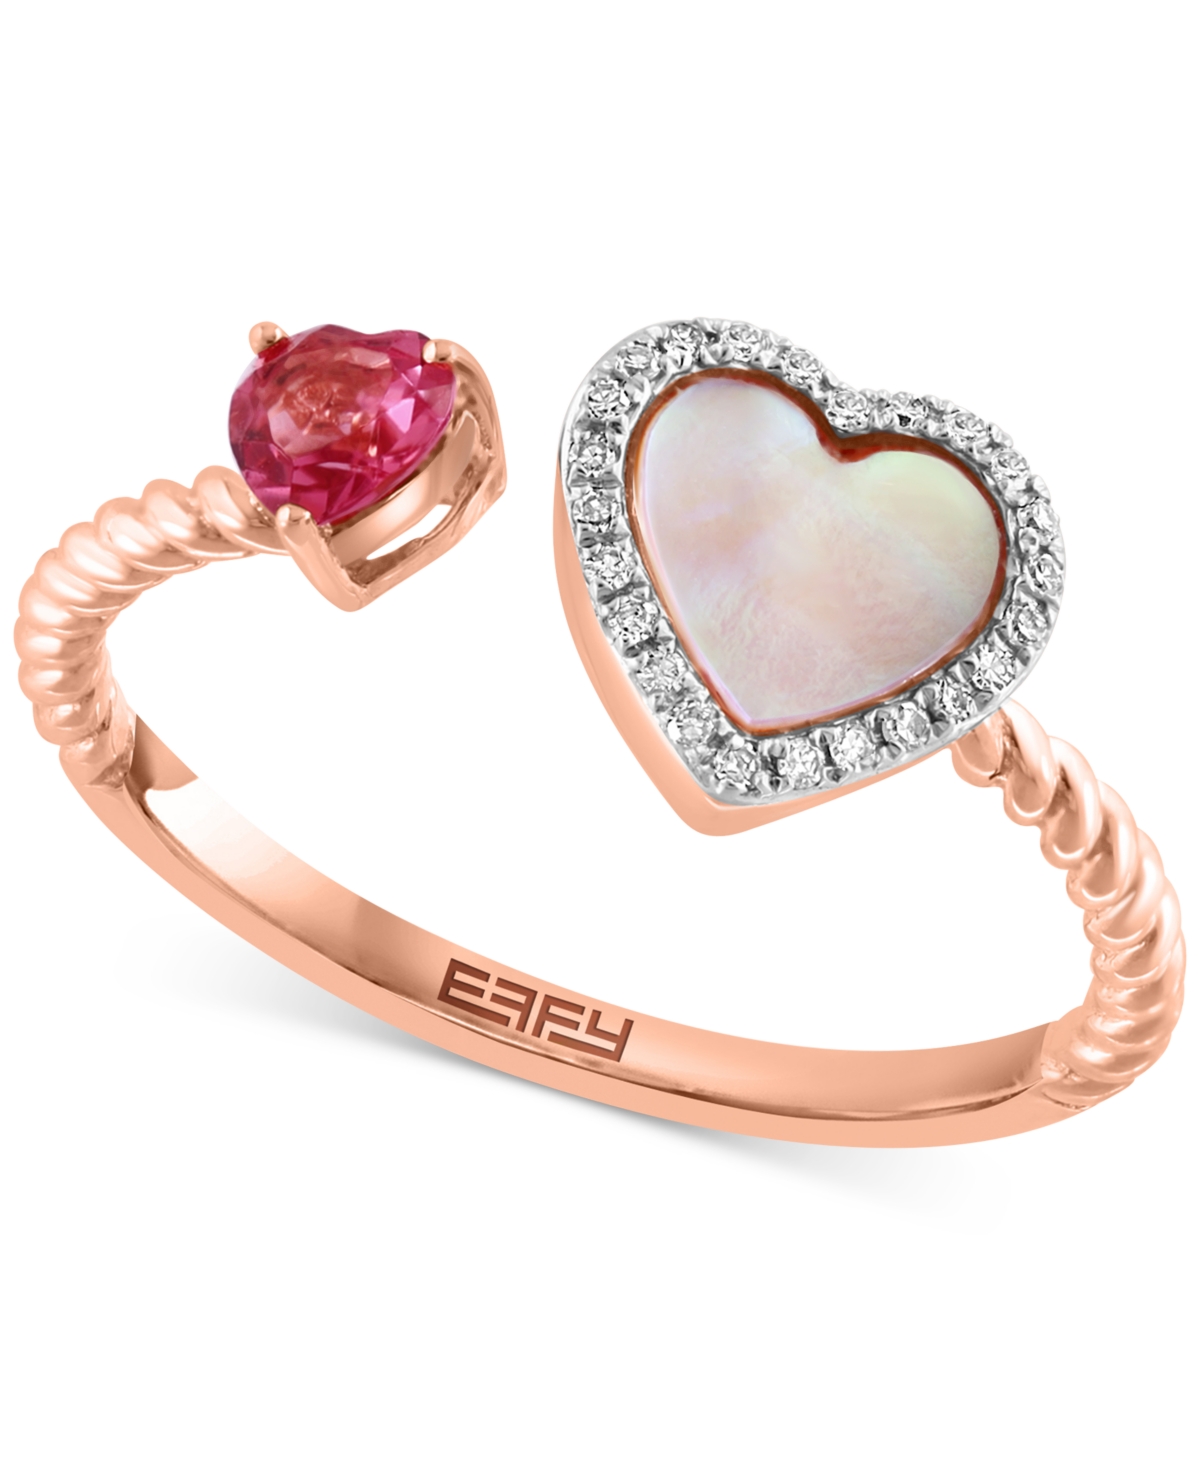 Effy Collection Effy Mother-of-Pearl, Pink Tourmaline (1/5 ct. t.w.), & Diamond (1/20 ct. t.w.) Heart Cuff Ring in 14k Rose Gold